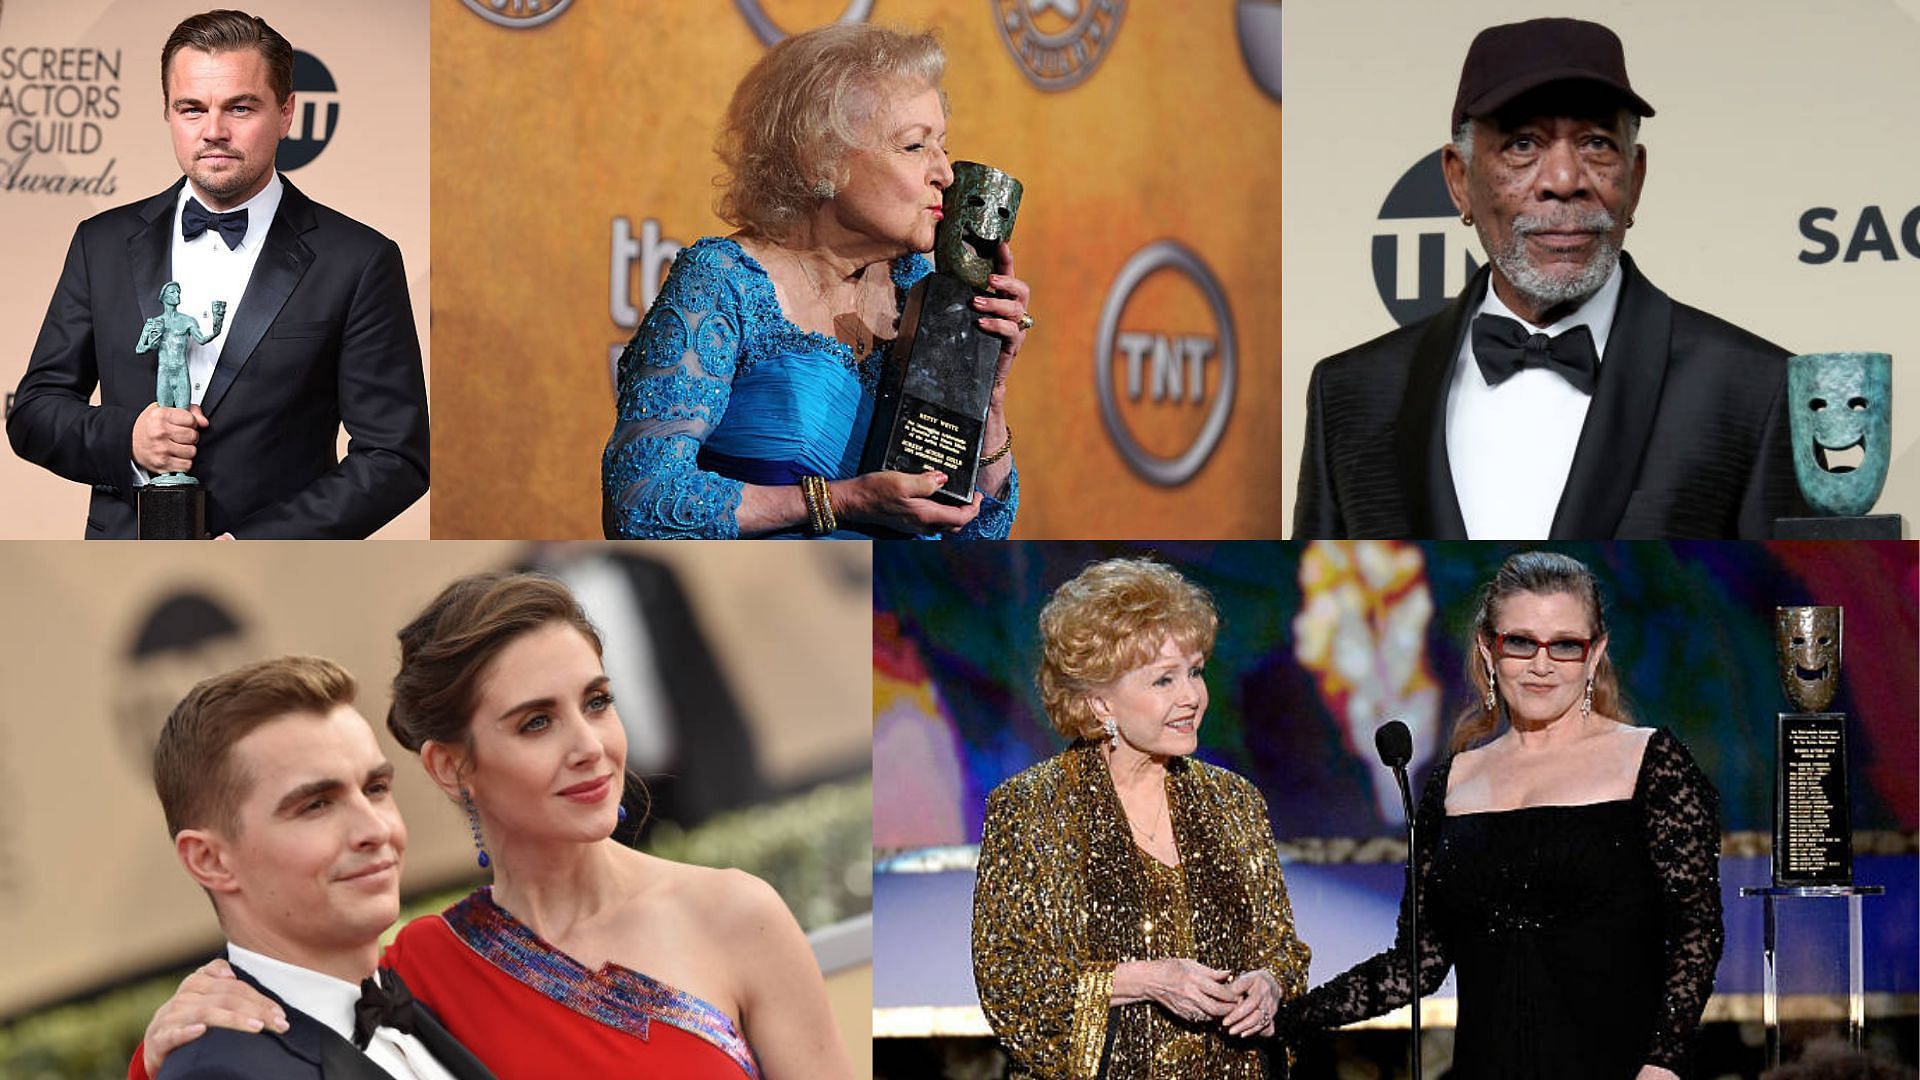 Five unforgettable moments in the history of SAG Awards (Image via Getty Images)